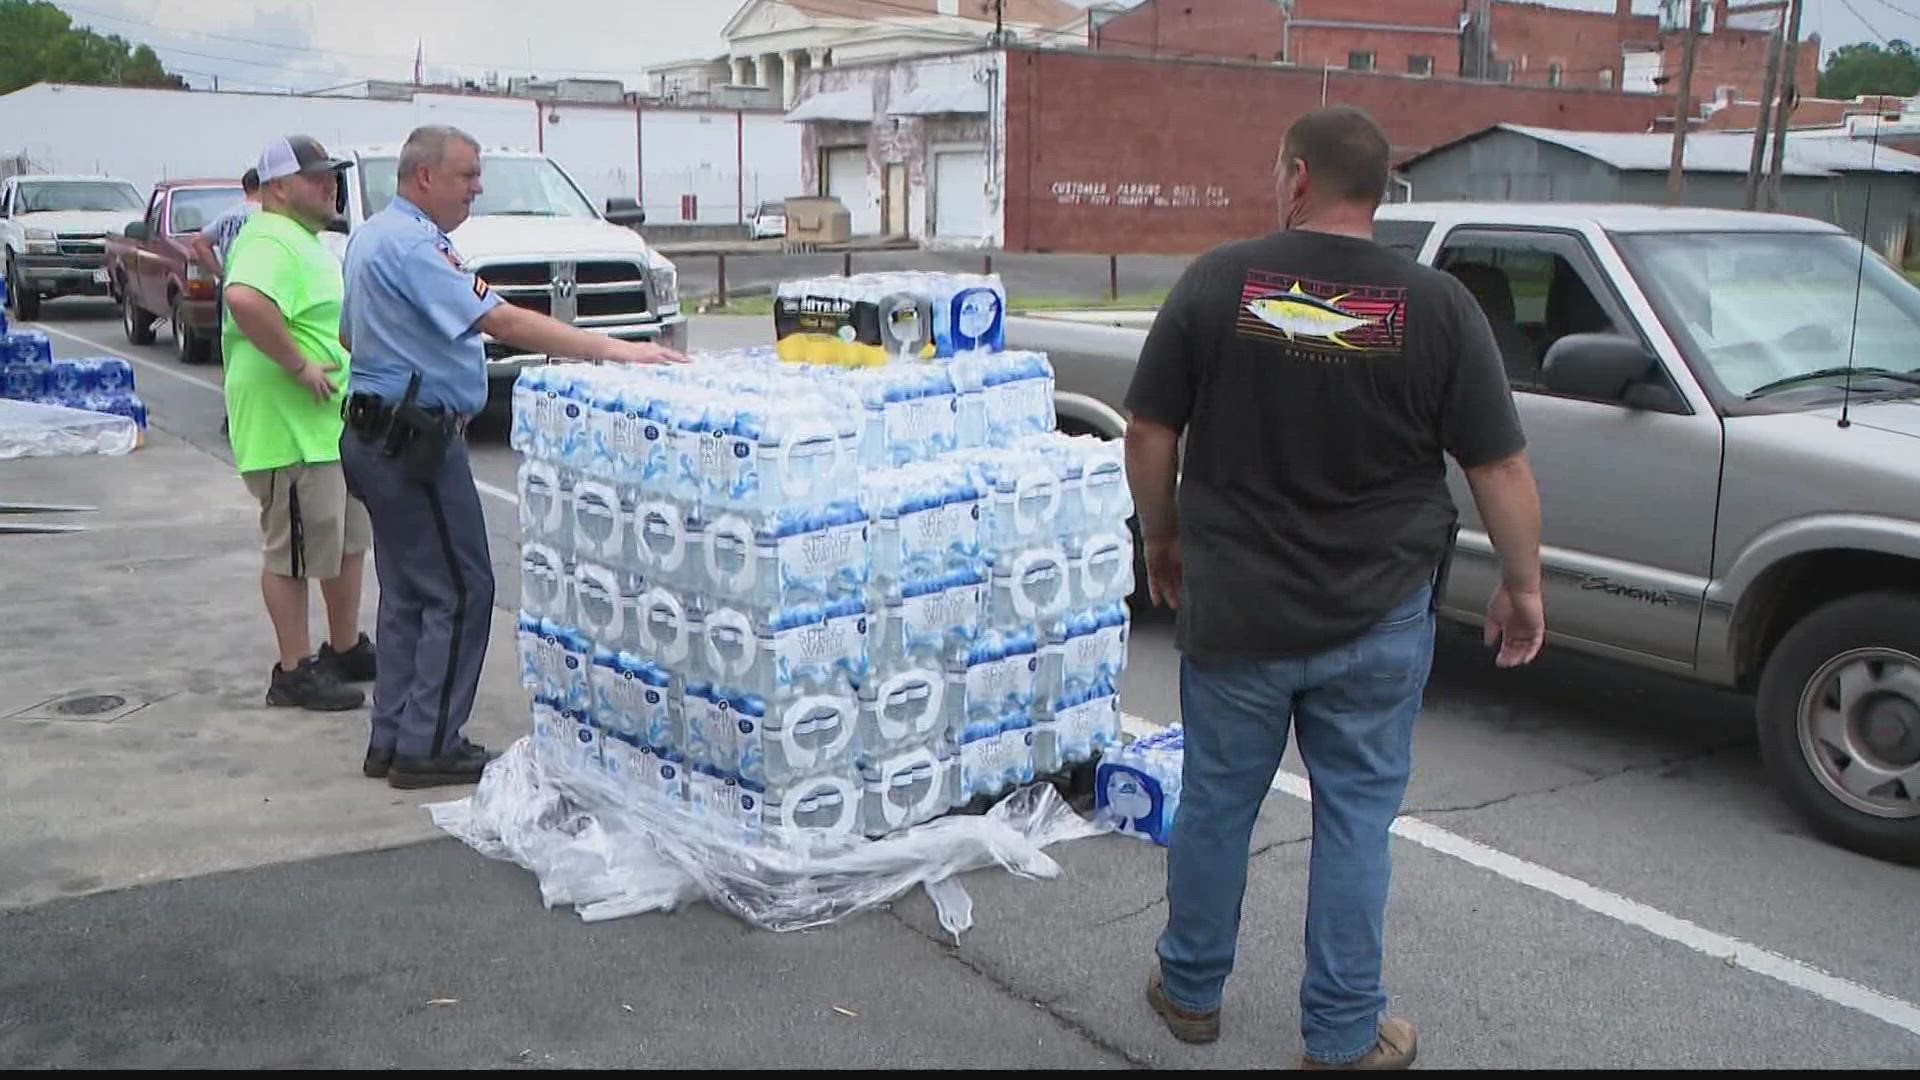 People are coming together to get drinkable water to the community. Officials said it could take days.